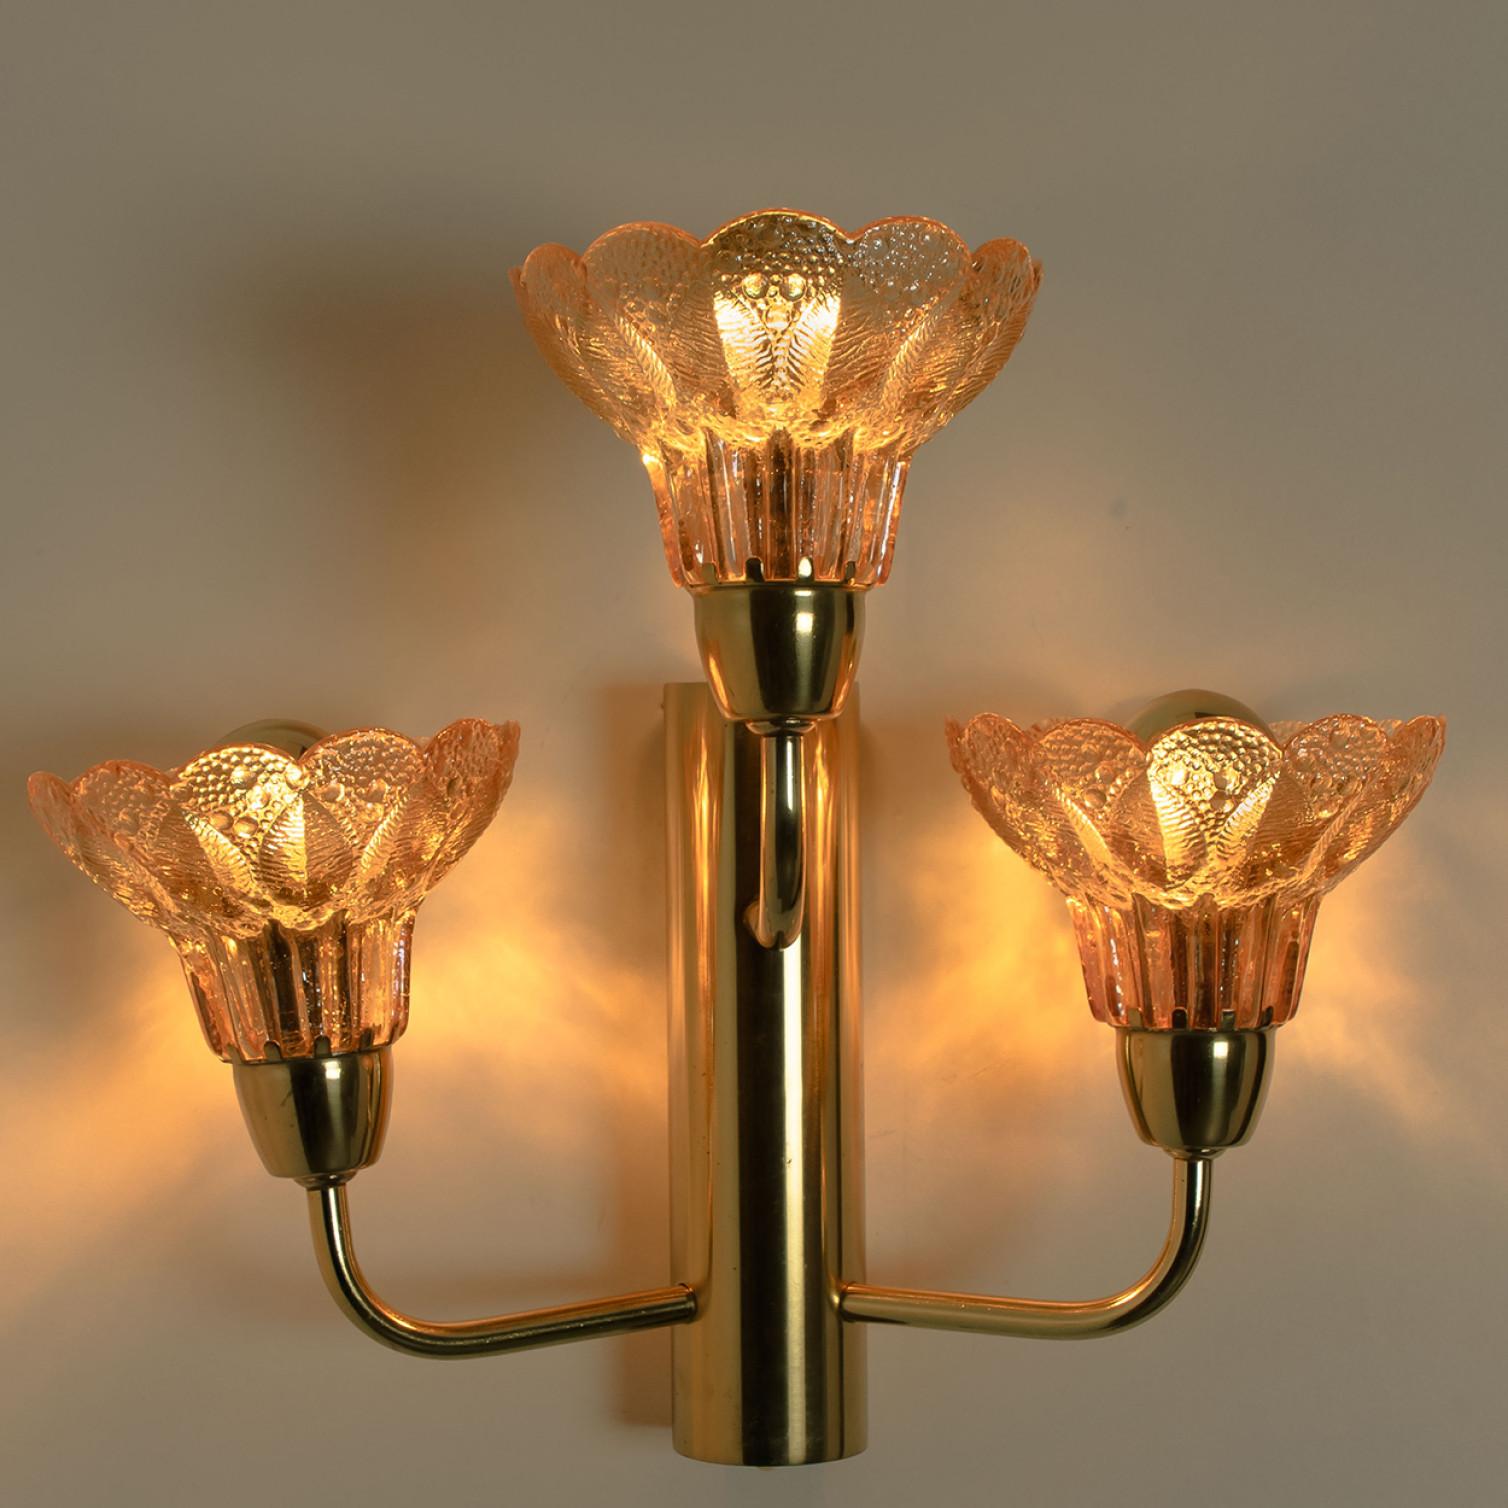 Several Flower Glass and Brass Wall Sconces, Germany, 1960s For Sale 3